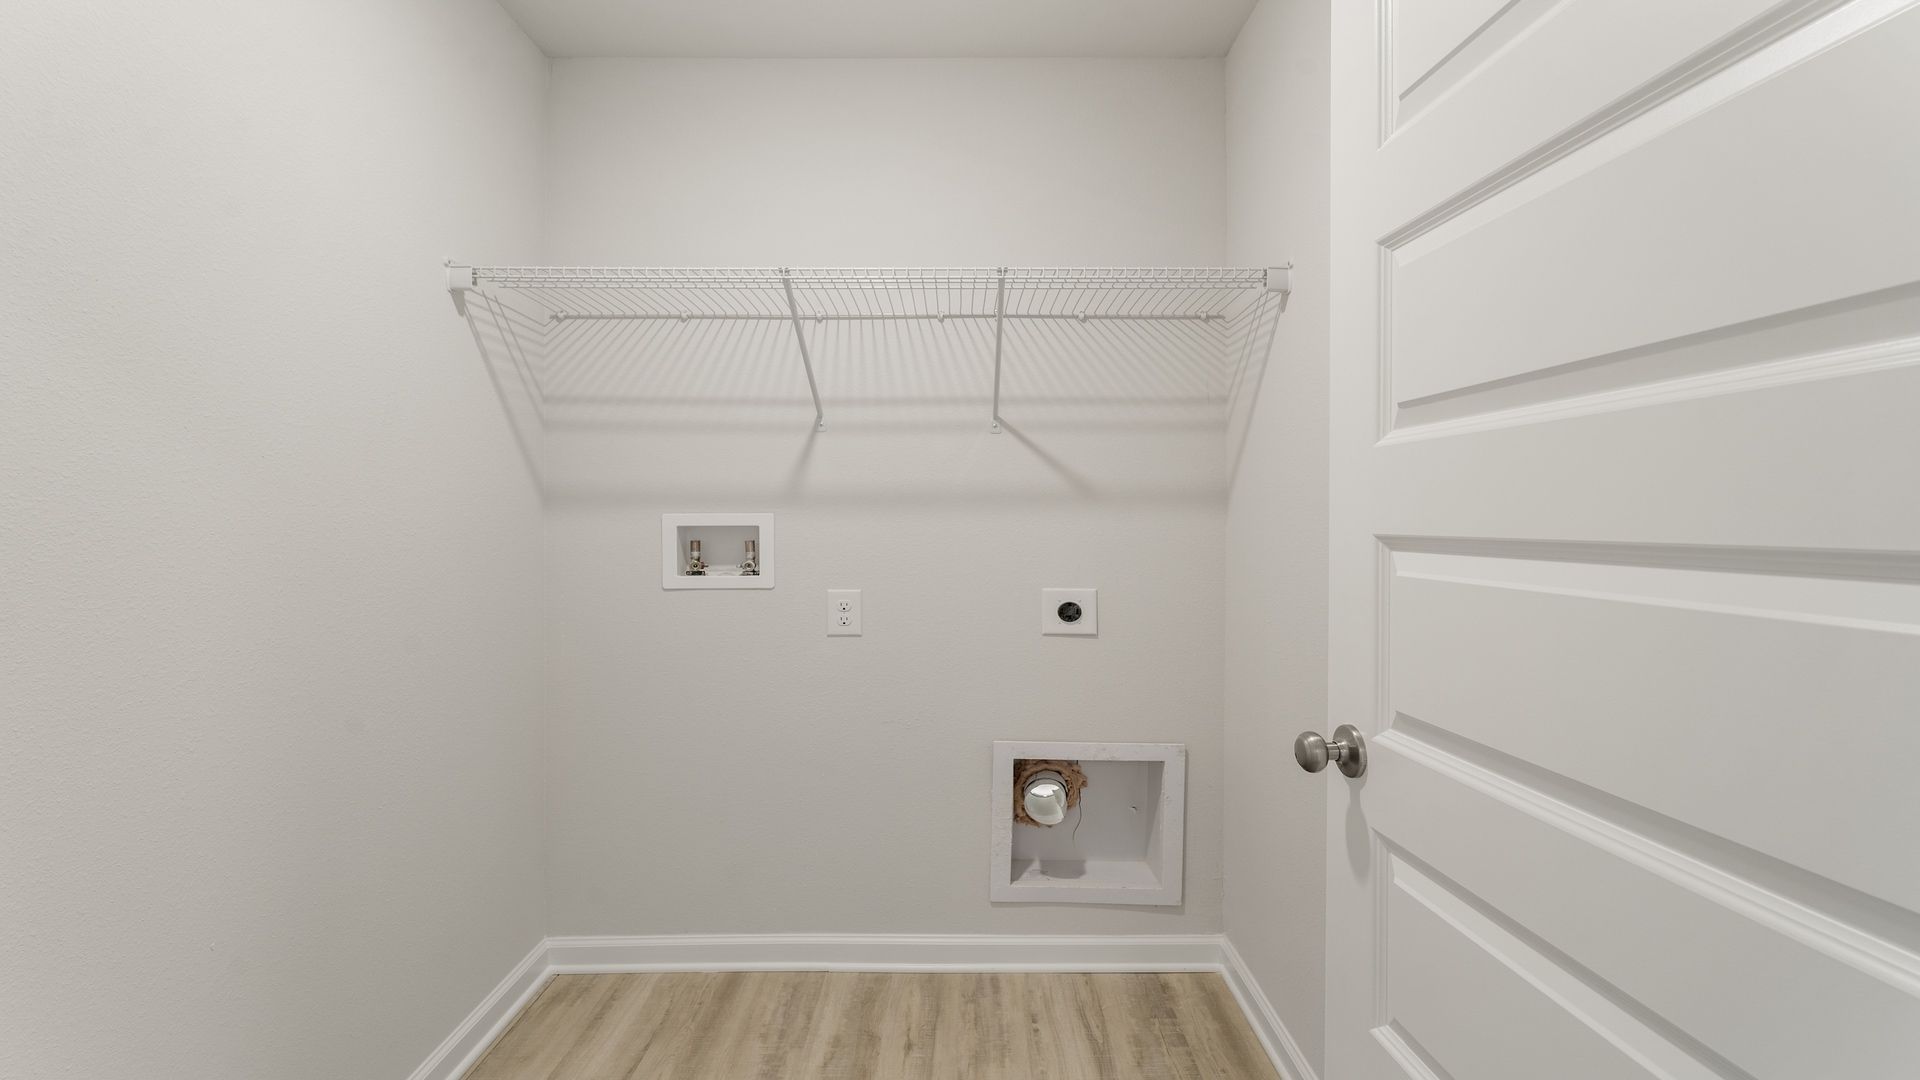 Upstairs laundry room with ventilated shelving.